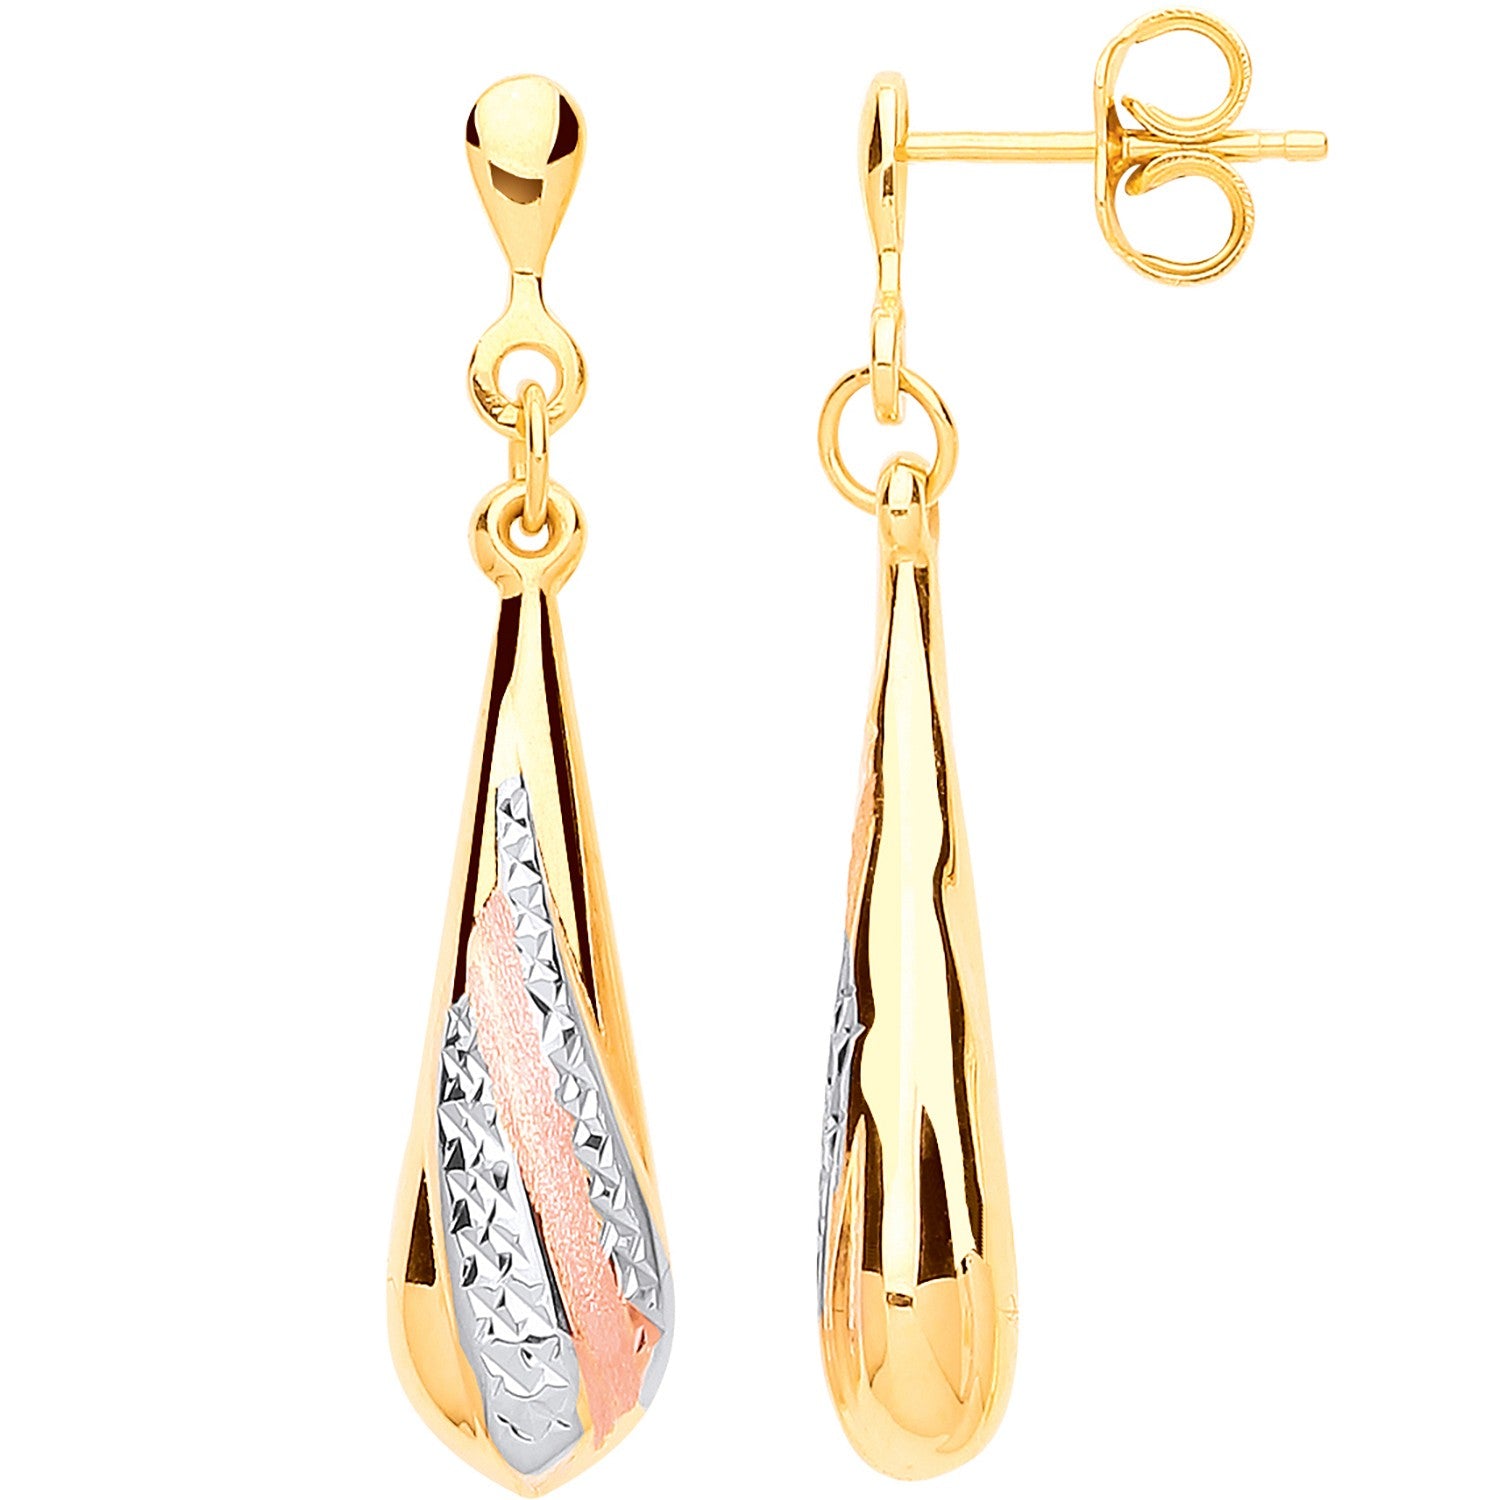 Y/G, RG Satin Finish, White Gold Ribbed Drop Earrings